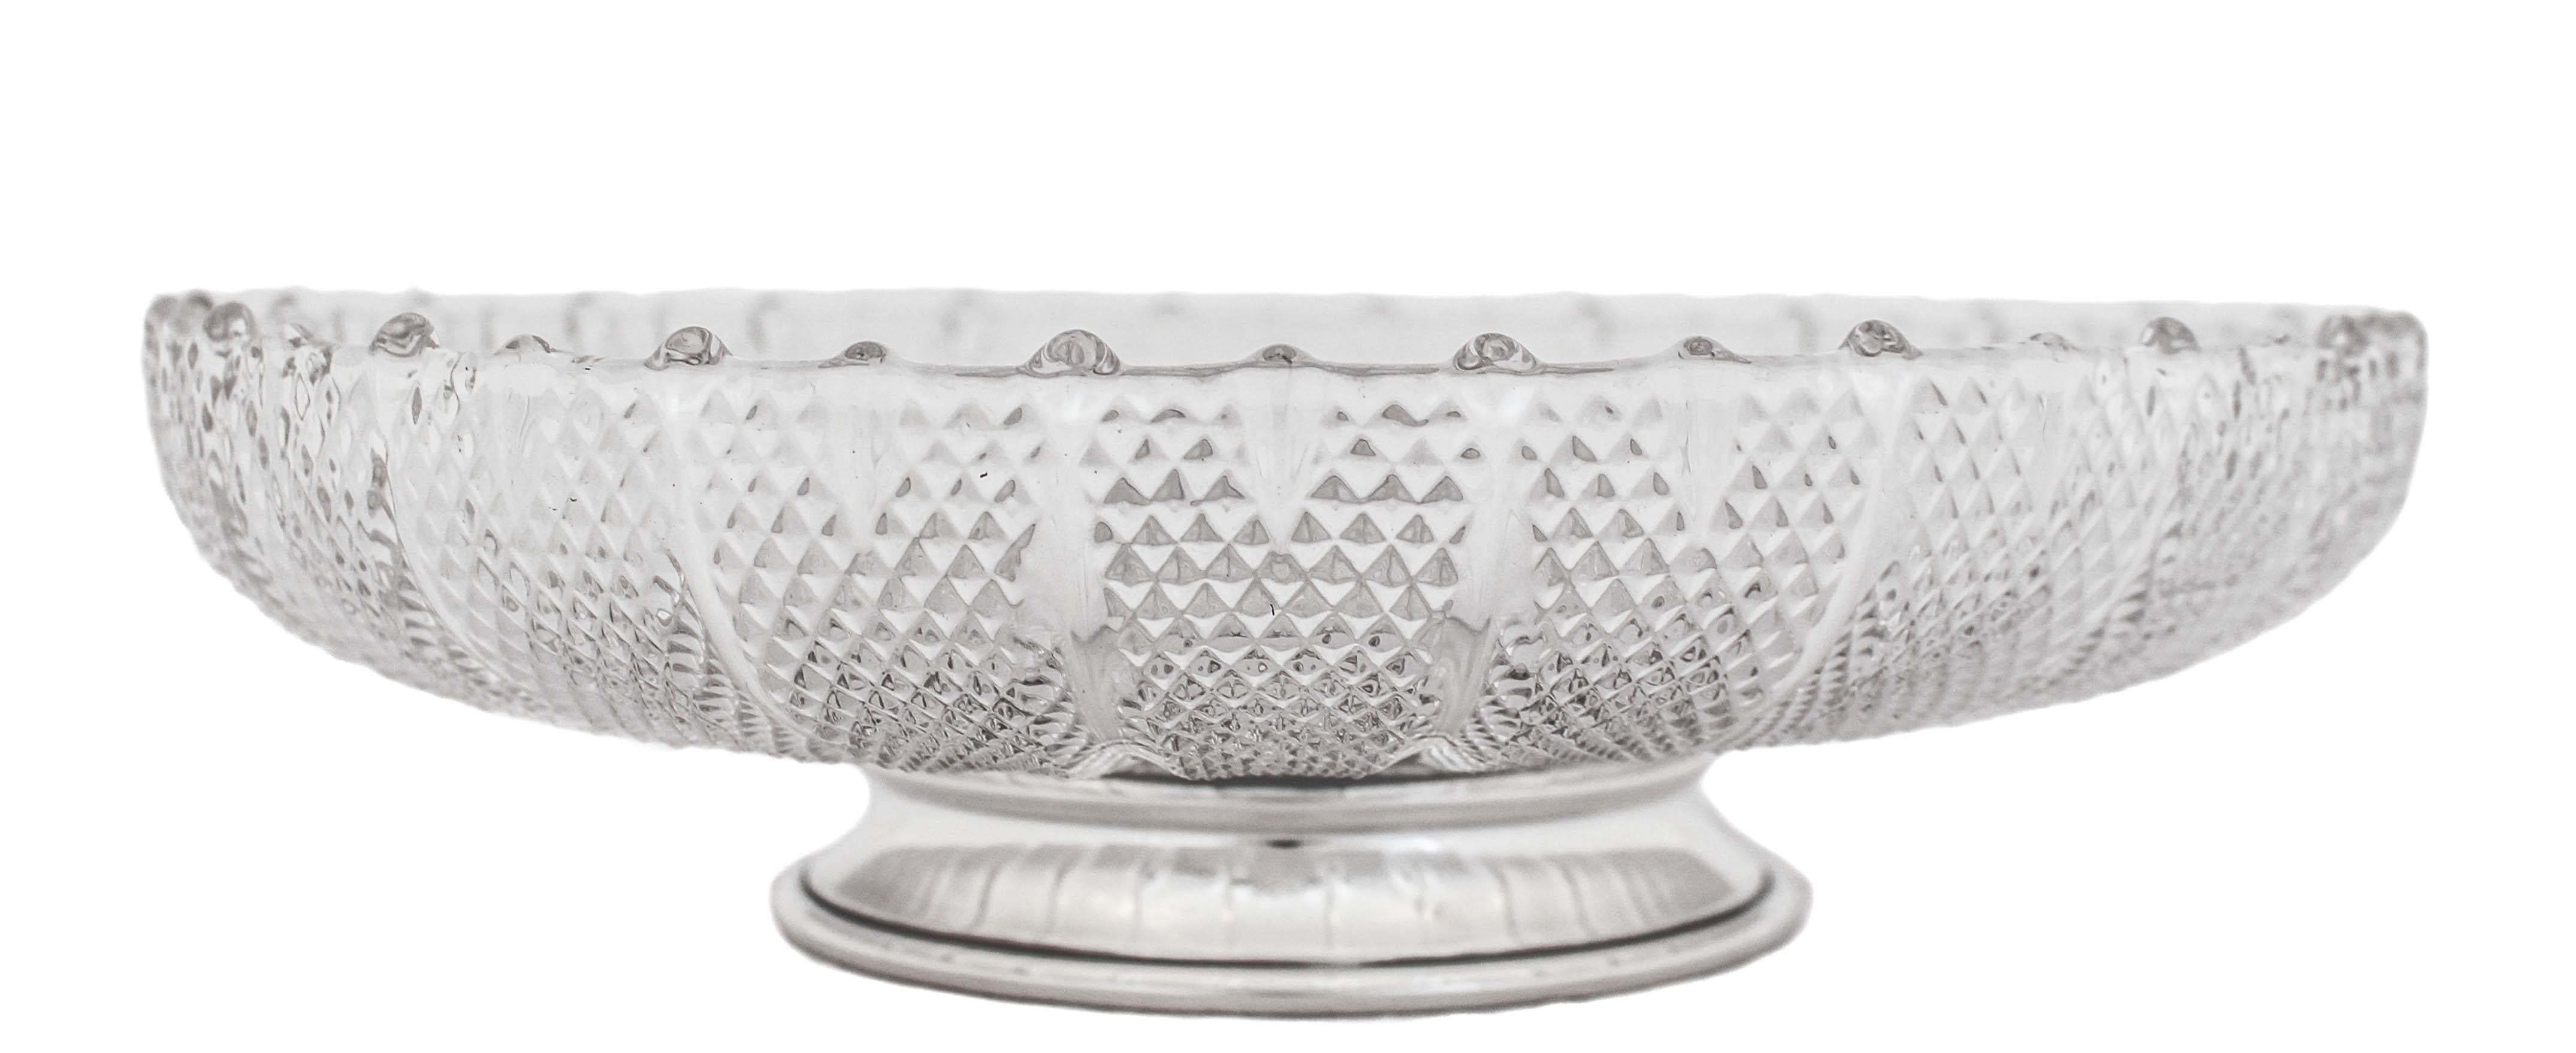 We are happy to offer you this crystal bowl with a sterling silver pedestal by S. Kirk and Sons of Baltimore, Maryland.  Famous for their iconic “Repousse” and “Rose” patterns, this is very different and unique to the maker.  Unlike their other